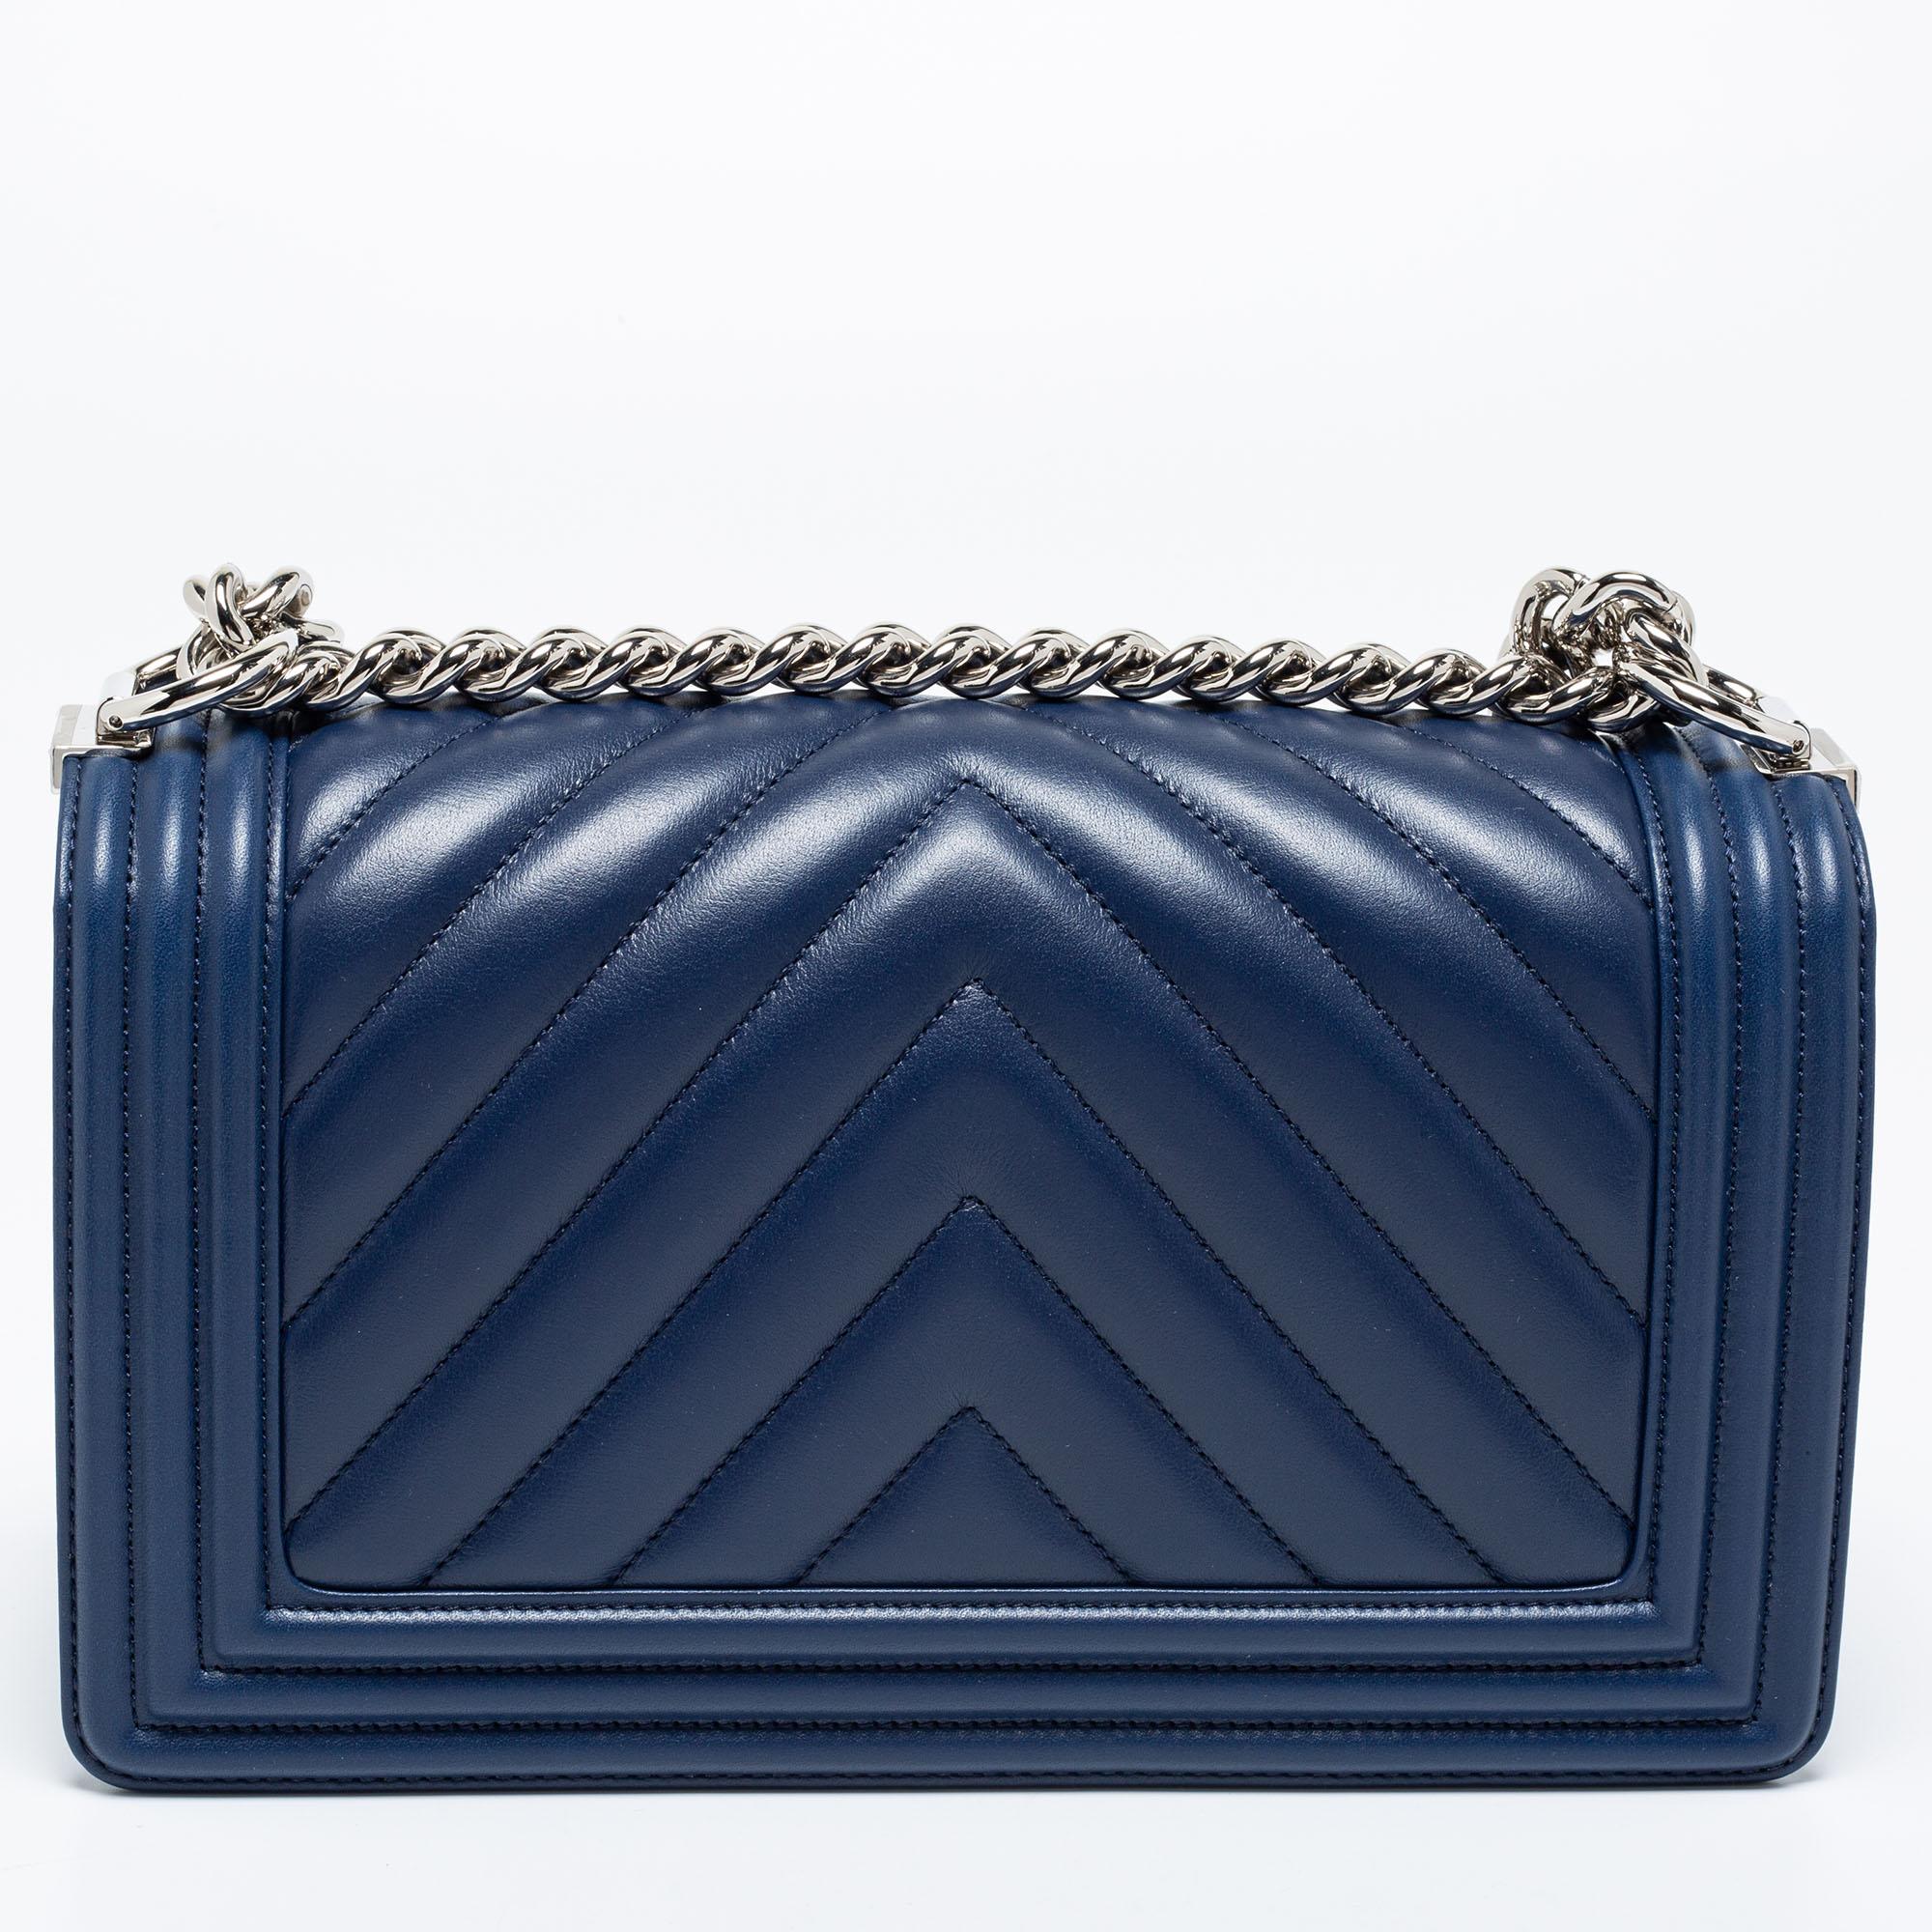 This medium Boy Flap bag from the House of Chanel is truly a pièce de résistance in the world of luxury fashion. It is crafted using navy-blue quilted leather, with a silver-toned CC accent placed on the front. This bag is held by a sturdy chain